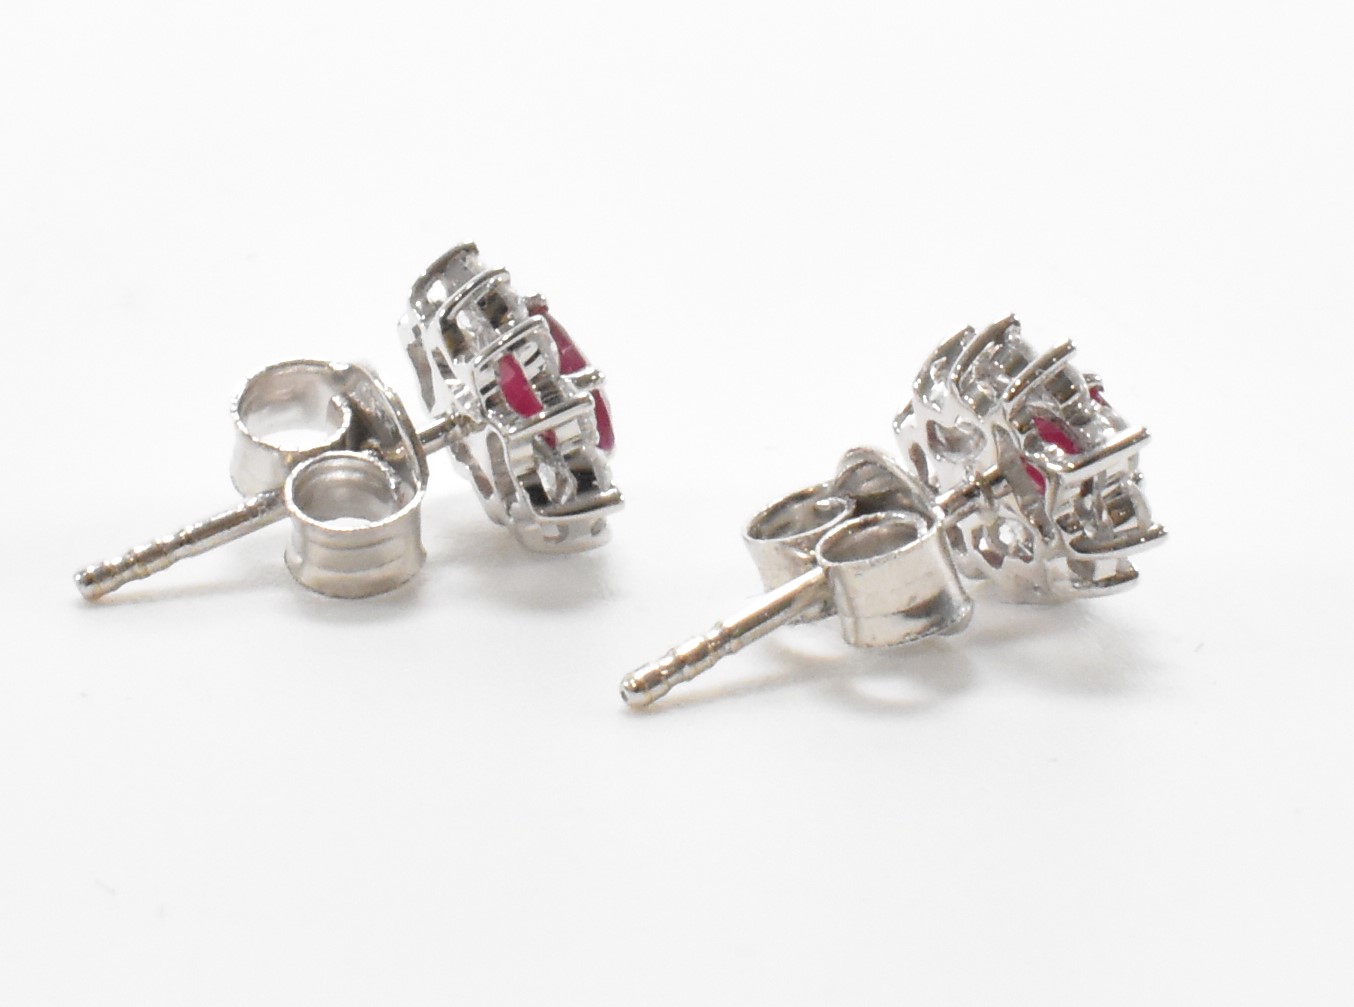 PAIR OF WHITE GOLD DIAMOND & RUBY CLUSTER EARRINGS - Image 5 of 5